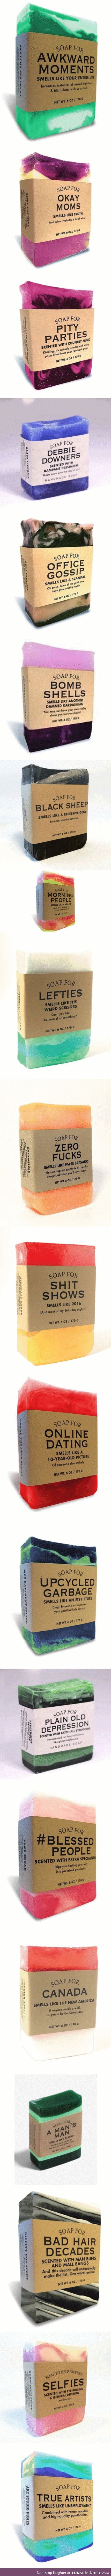 Soaps for every occasion!